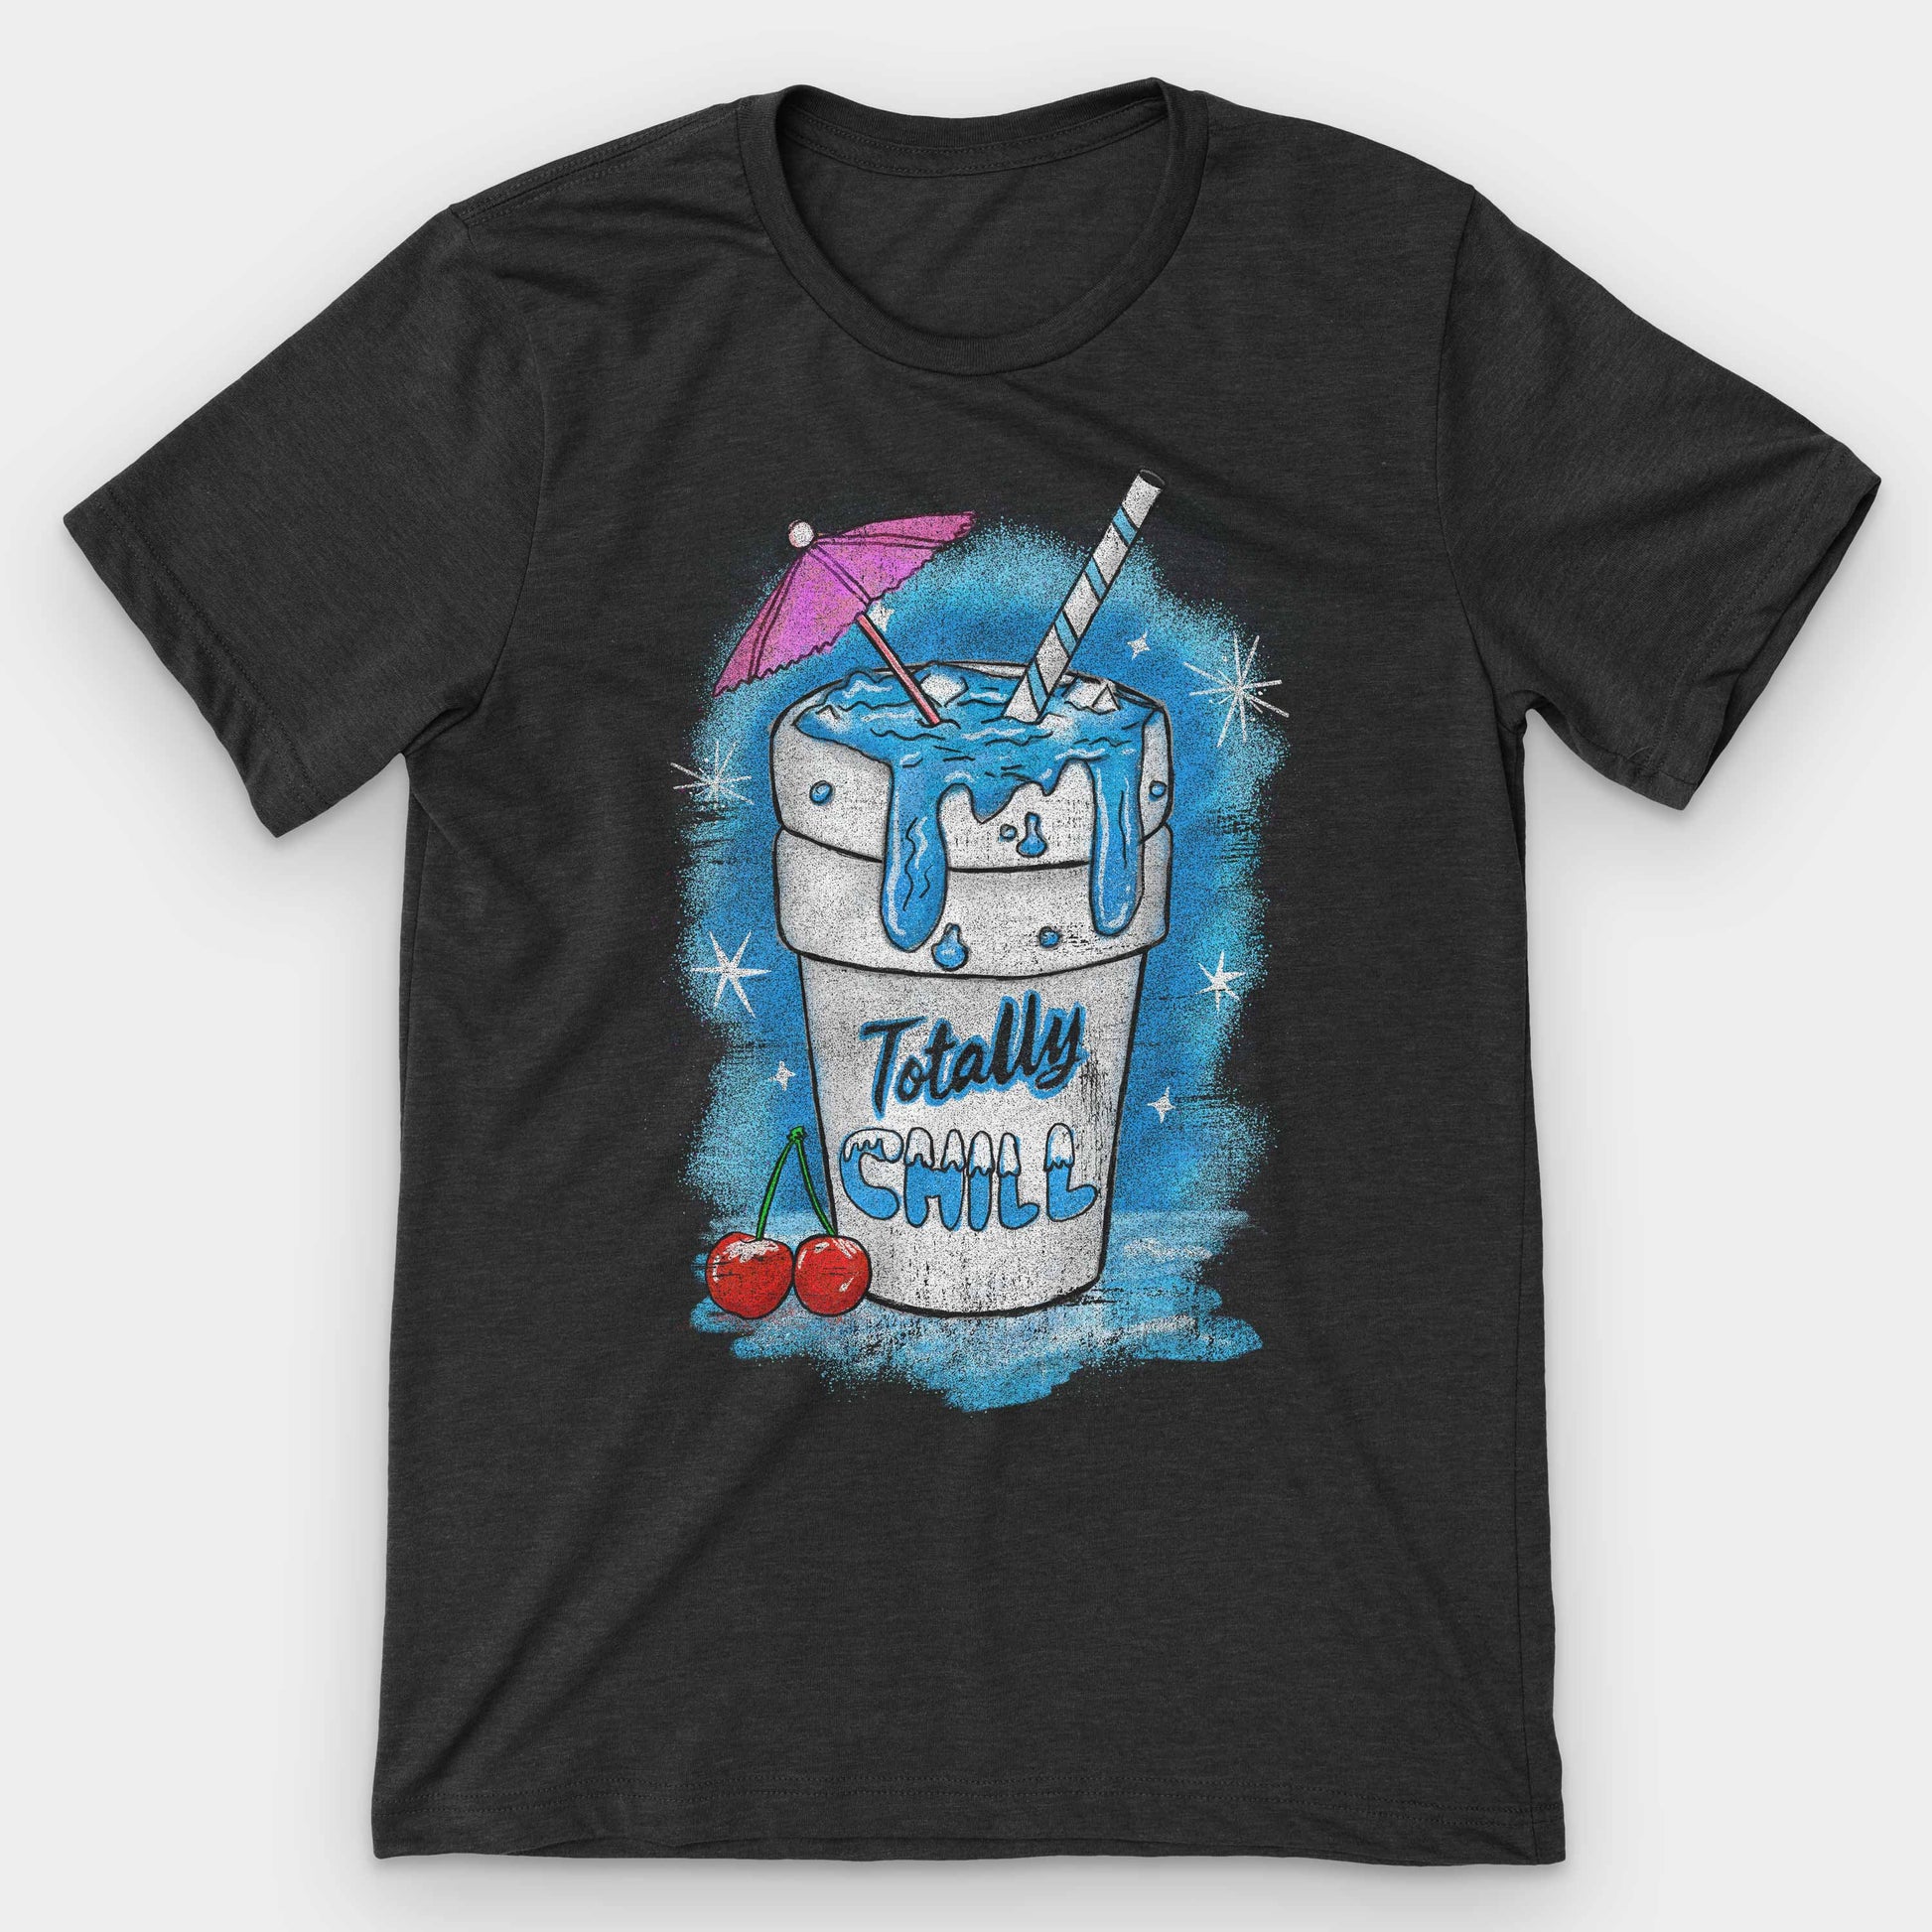 Black Heather Totally Chill Graphic T-Shirt by Snaxtime